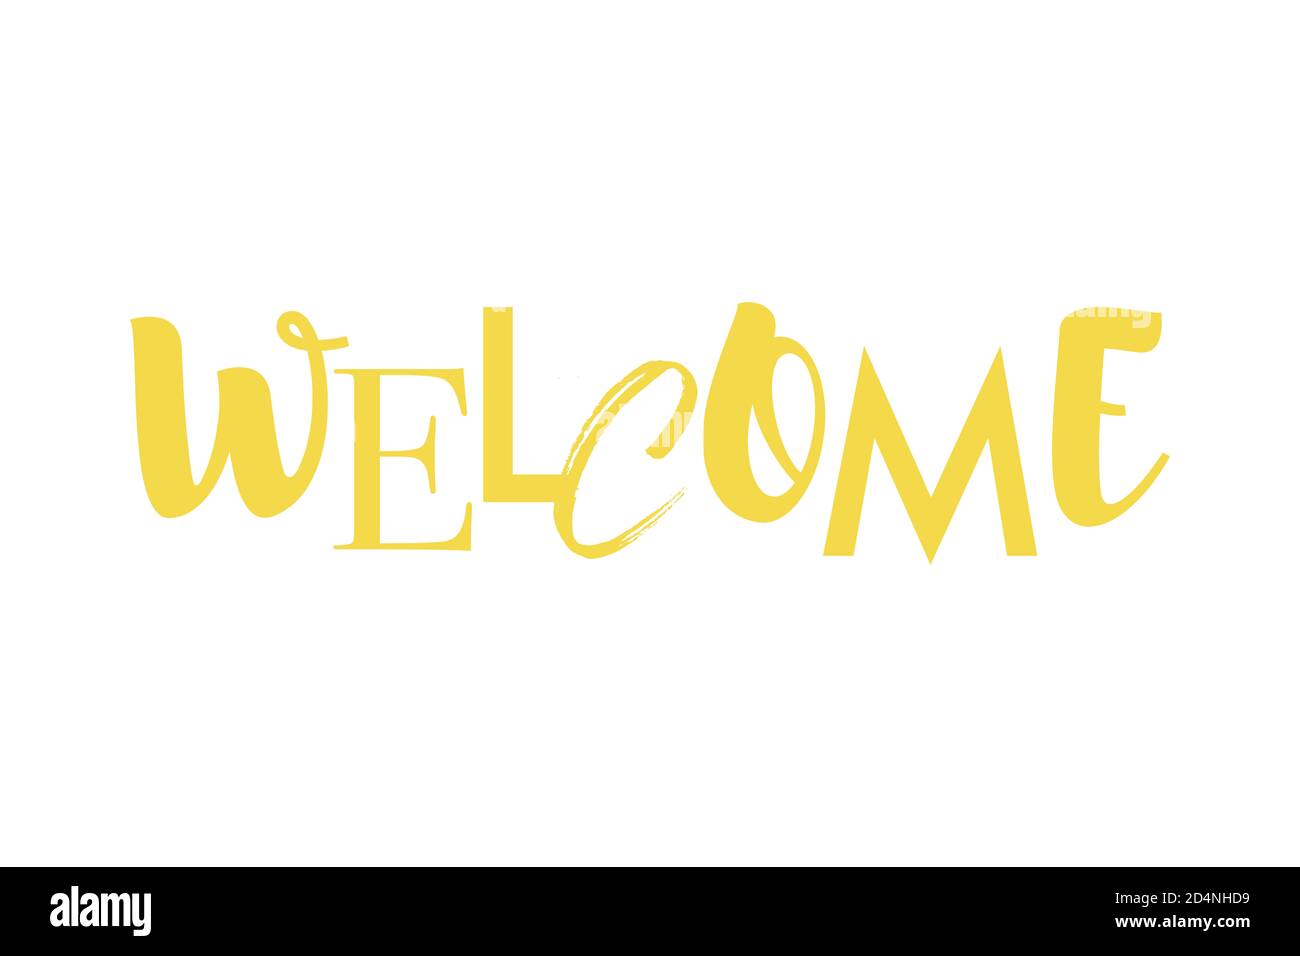 Modern, playful graphic design of a word 'Welcome' in yellow color. Urban, fun, creative typography. Stock Photo